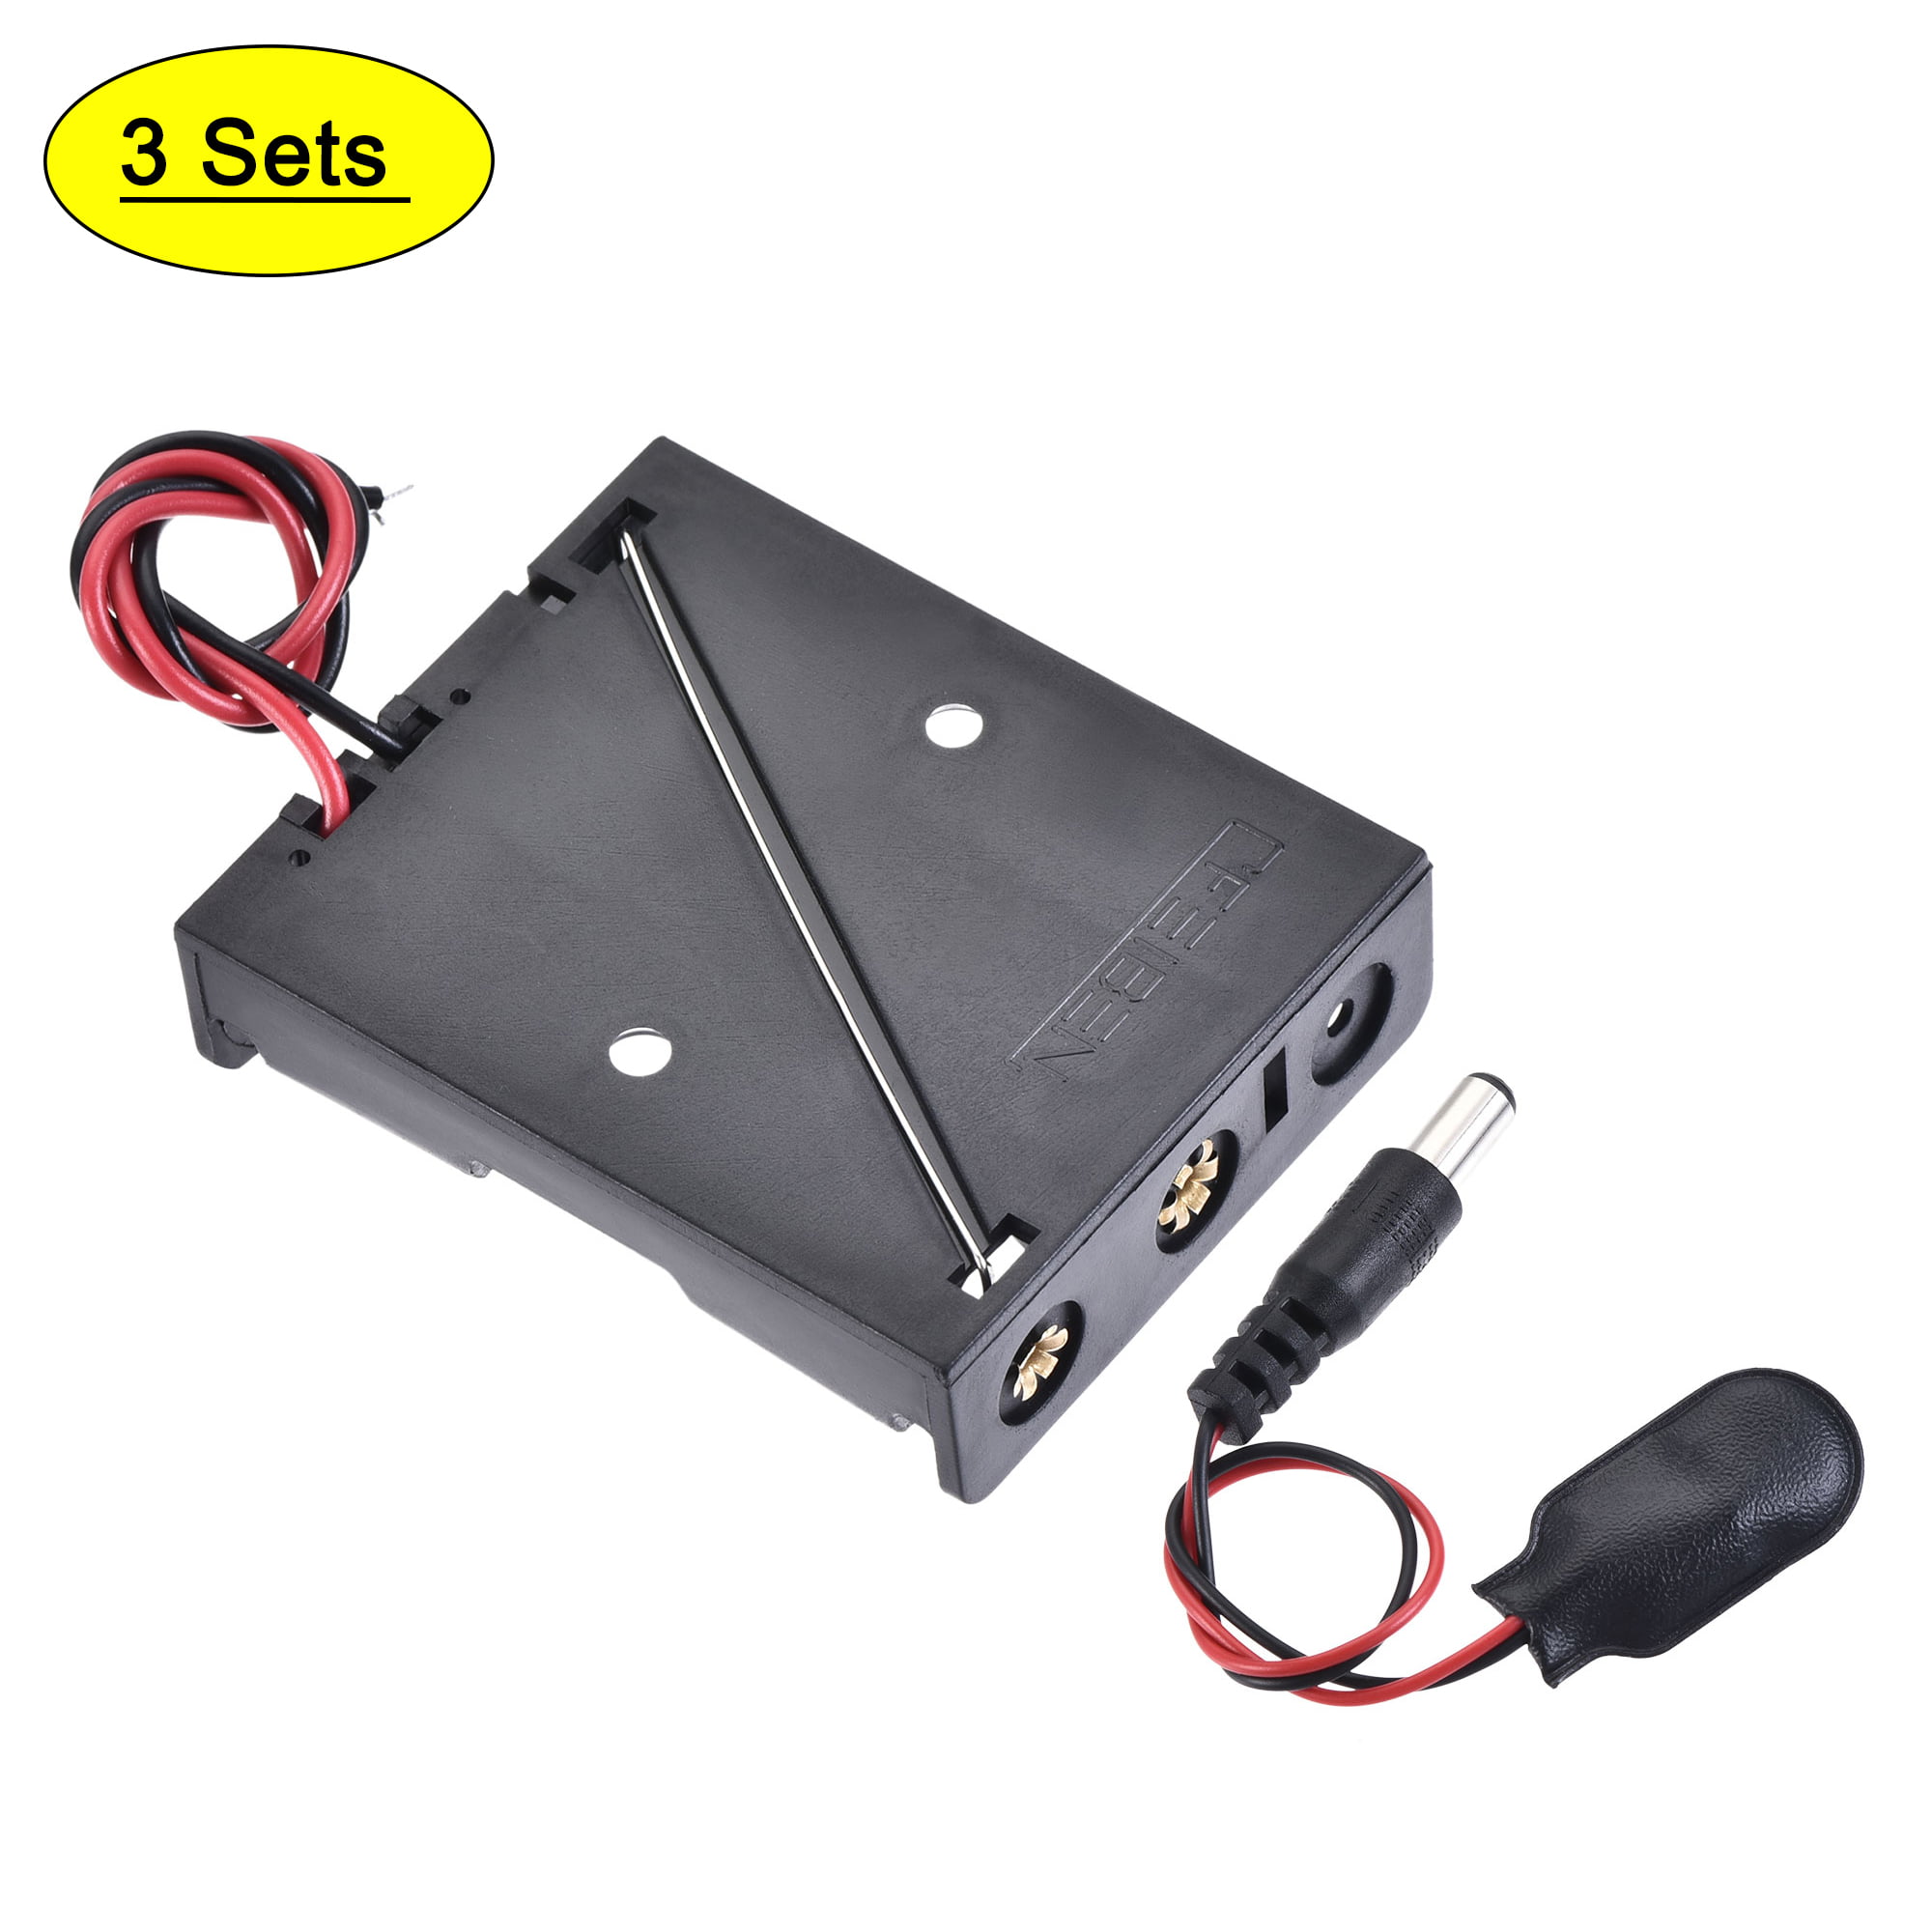 With DC Power Male Jack Adapter DC Holder Battery Box Kit  for 3-9V AA Battery 